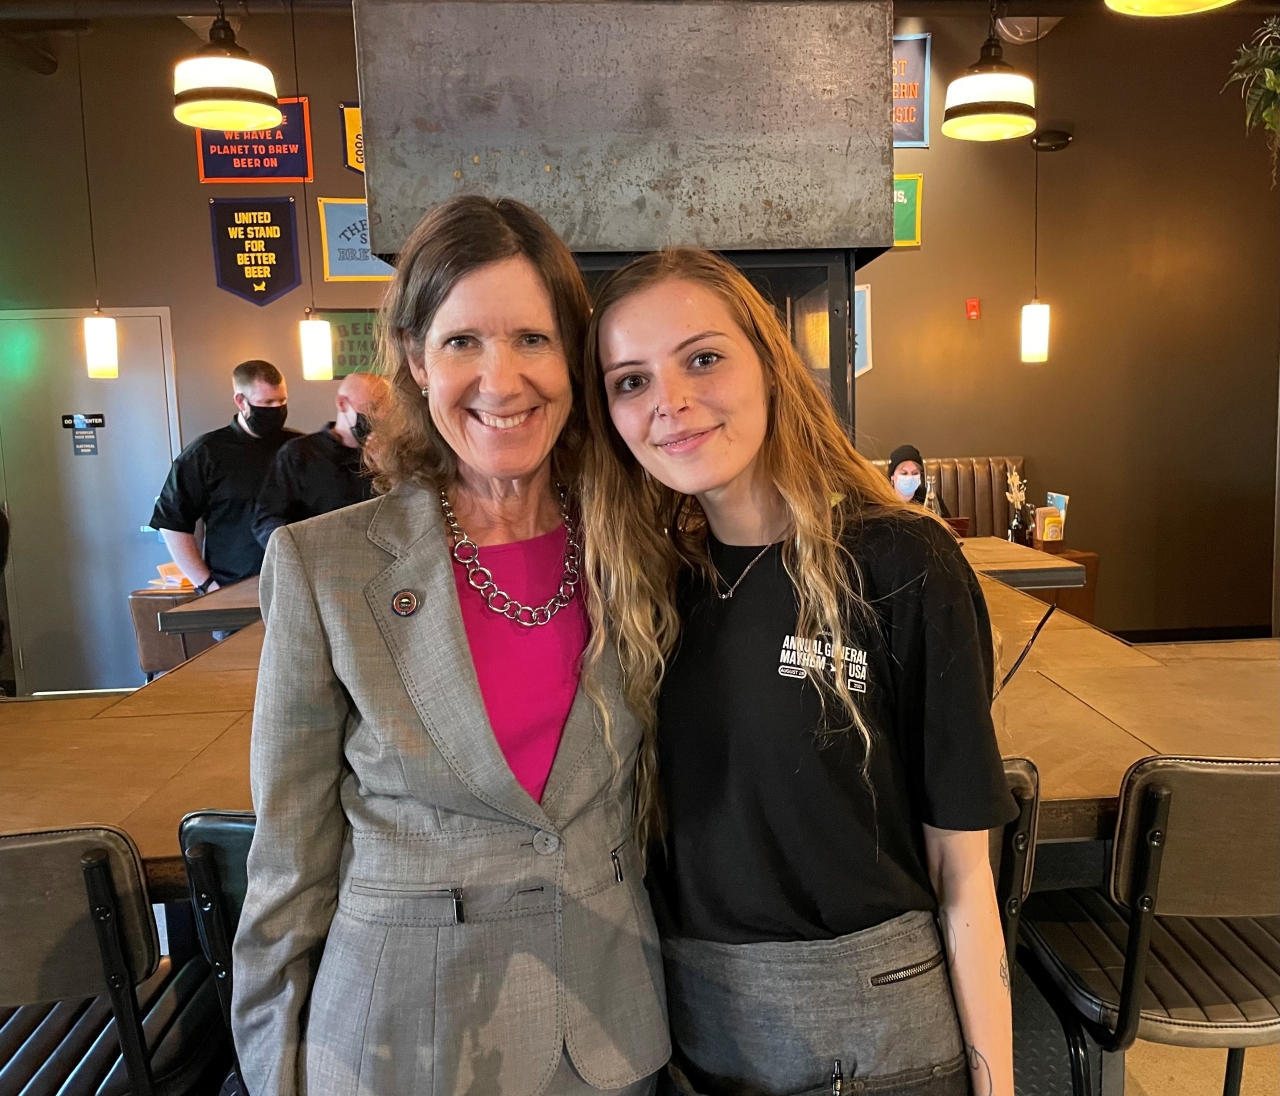 This is Taylor Moore. A hardworking young woman who inspired me with great customer service and enthusiasm at Brew Dogs restaurant. She represents the strong work ethic and future of Ohioans.